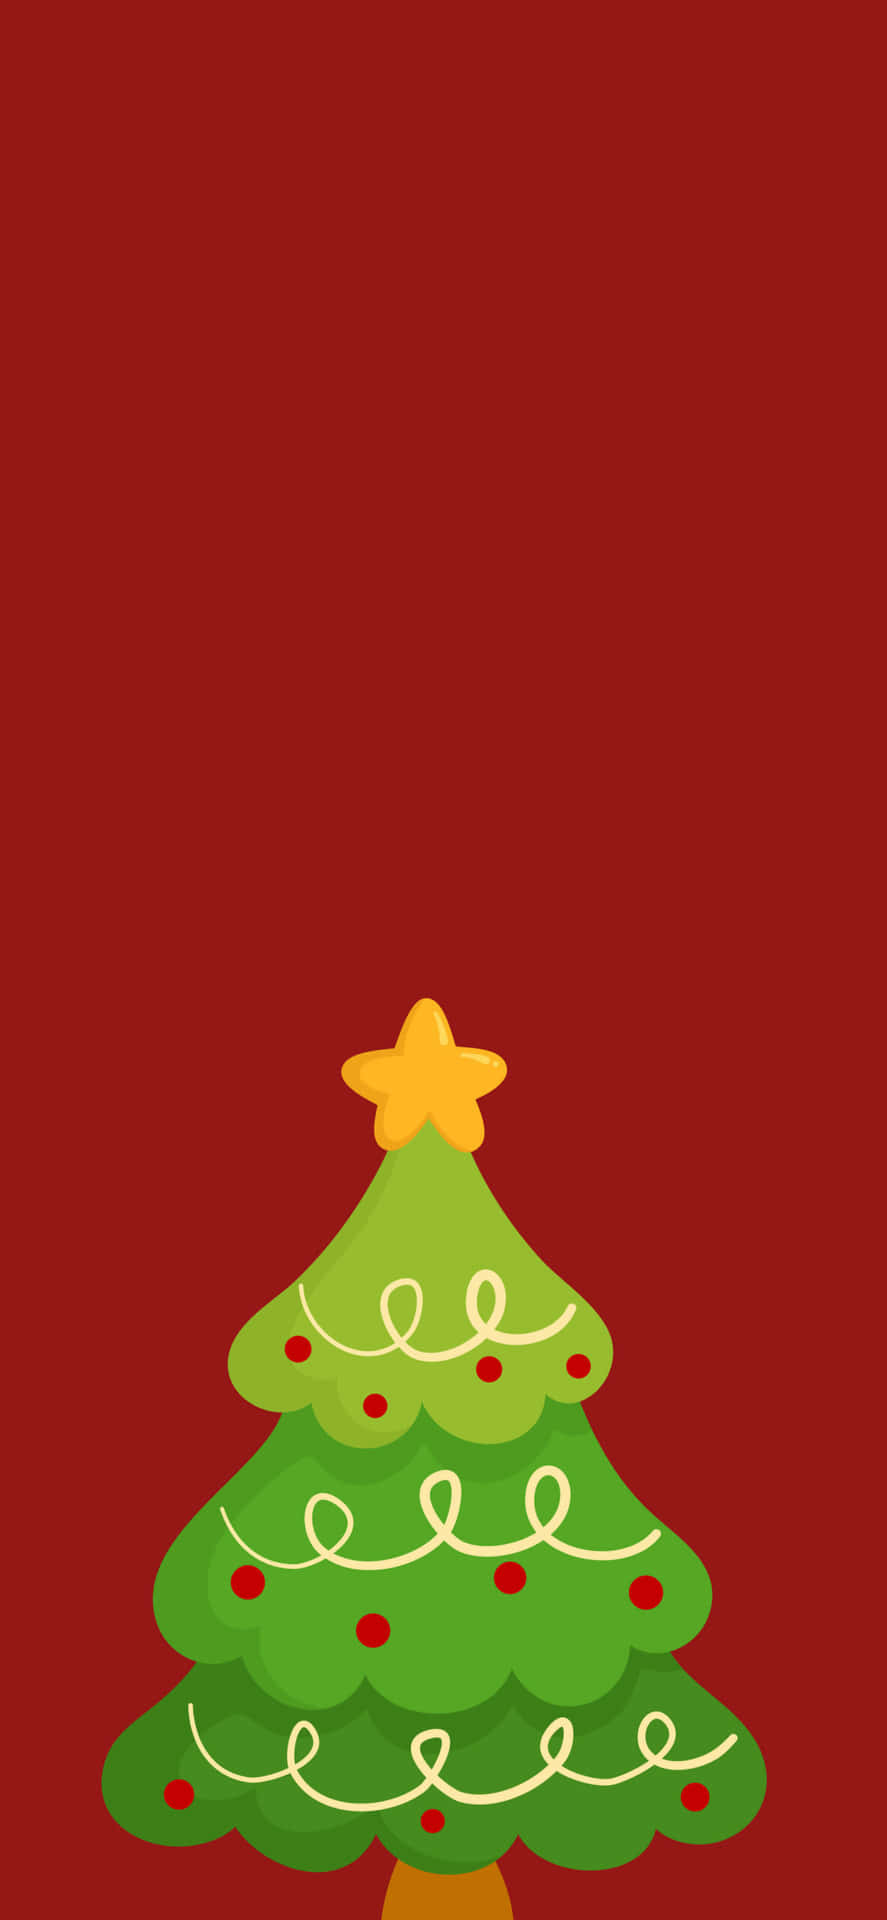 Celebrate the Holidays with This Adorable Christmas Tree Wallpaper